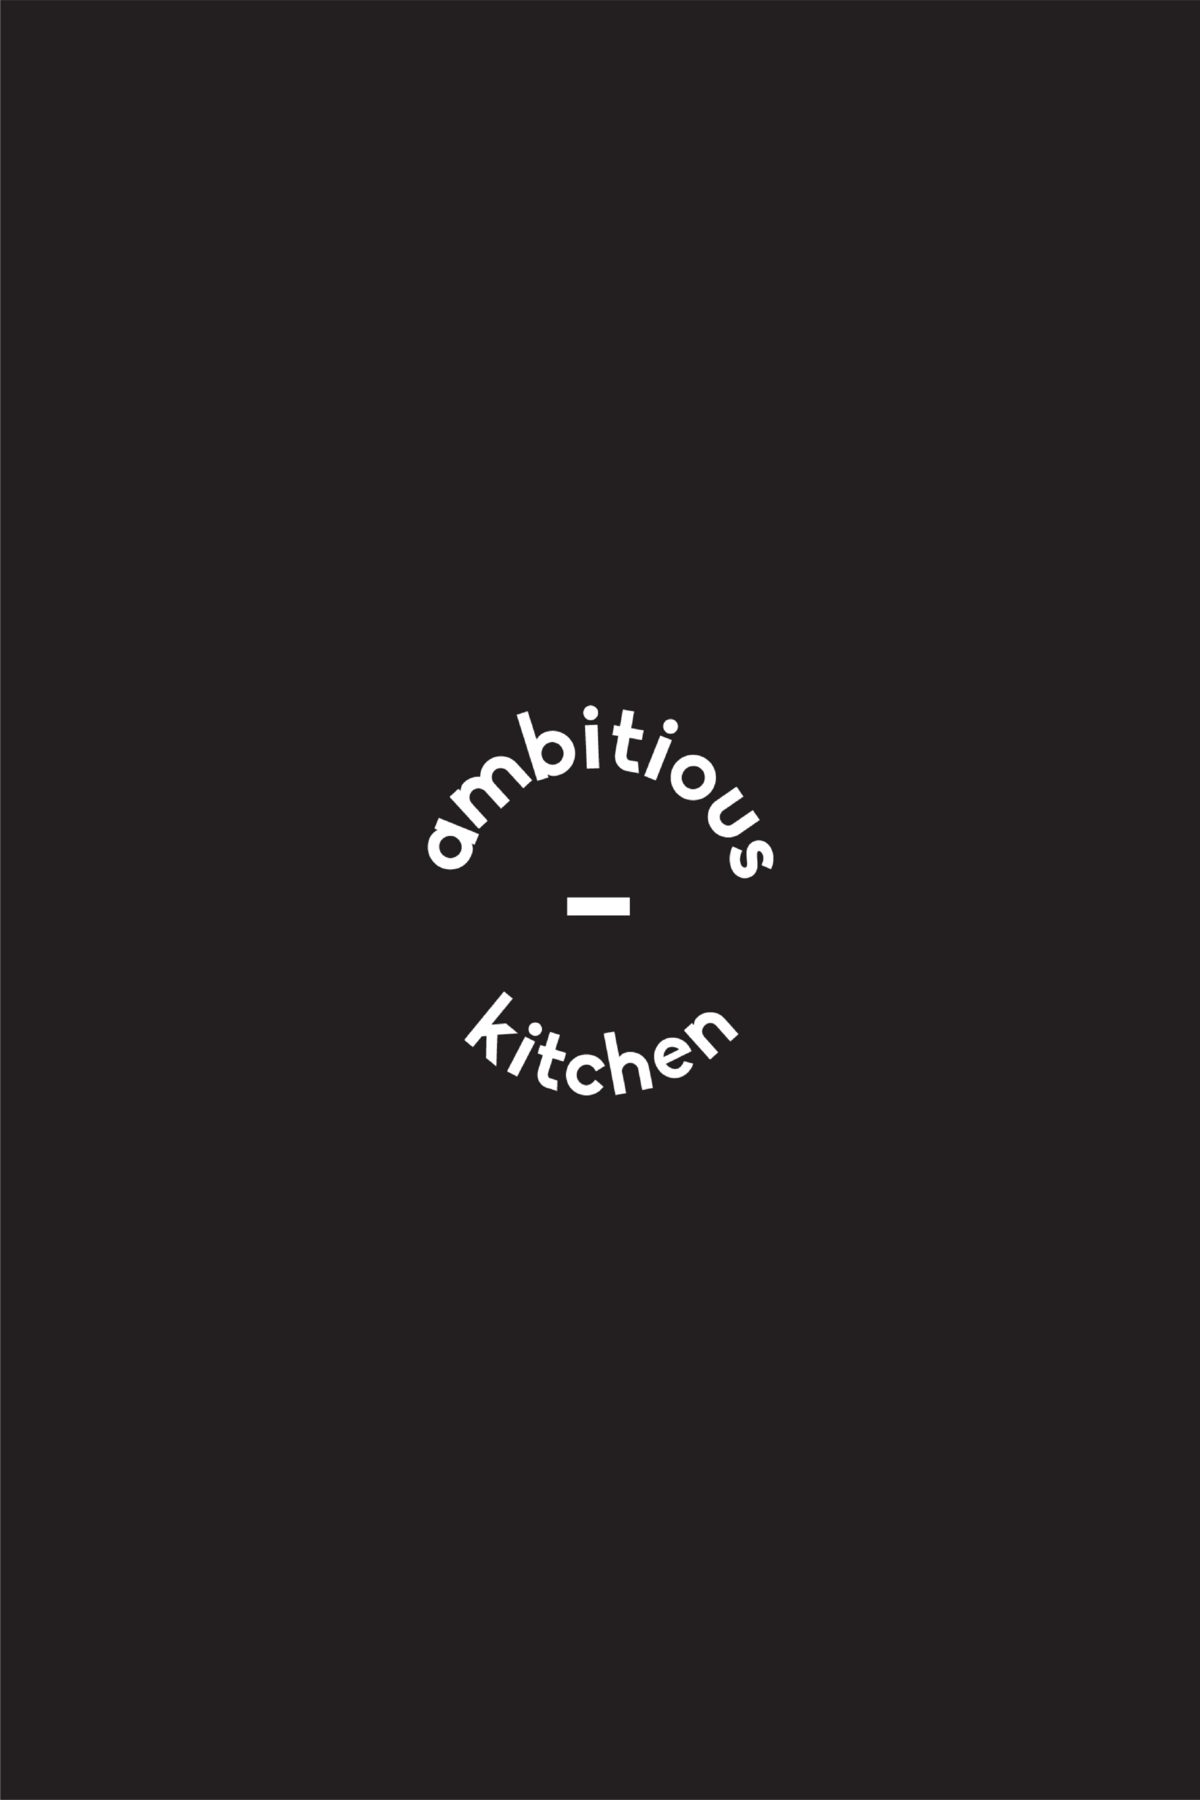 Branding and Website Design for Food and Lifestyle blog Ambitious Kitchen by Katelyn Gambler